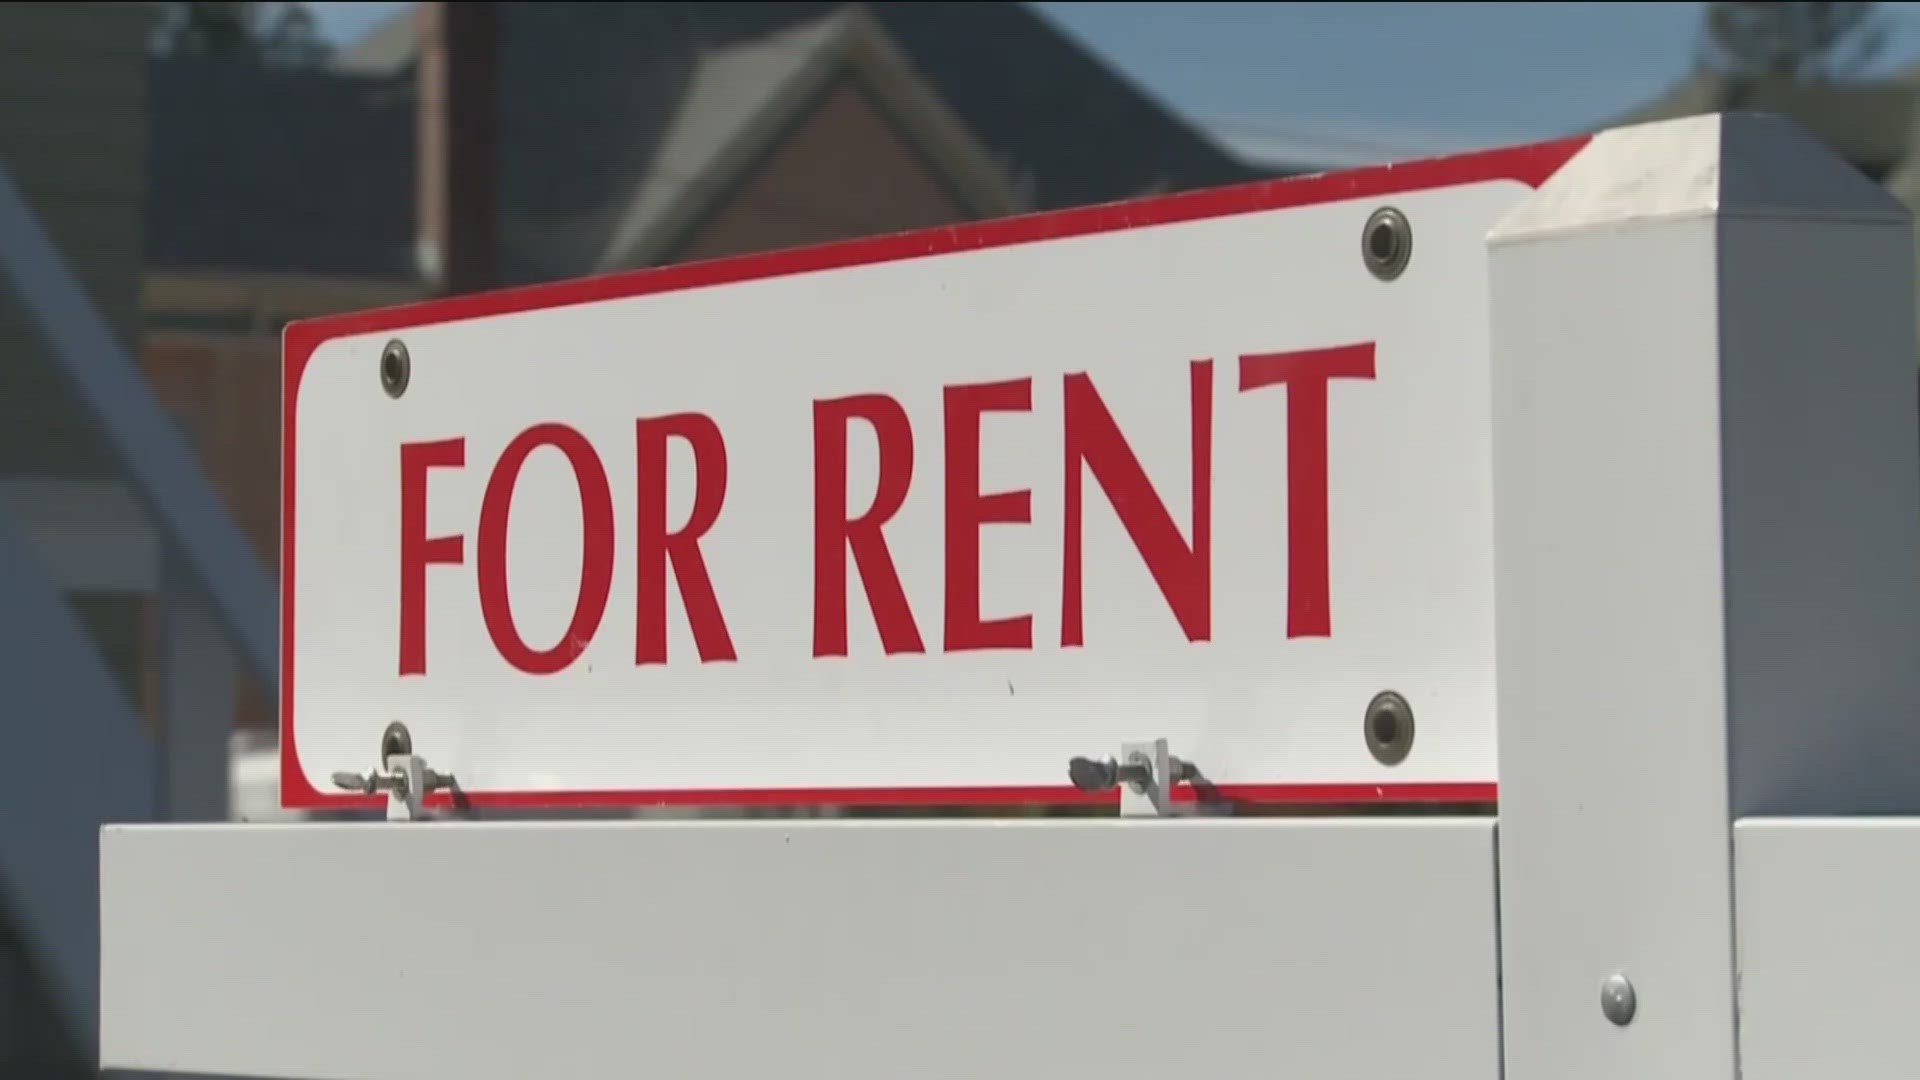 The ordinance would provide protections to renters from eviction as long as they continue to pay rent and comply with their lease.